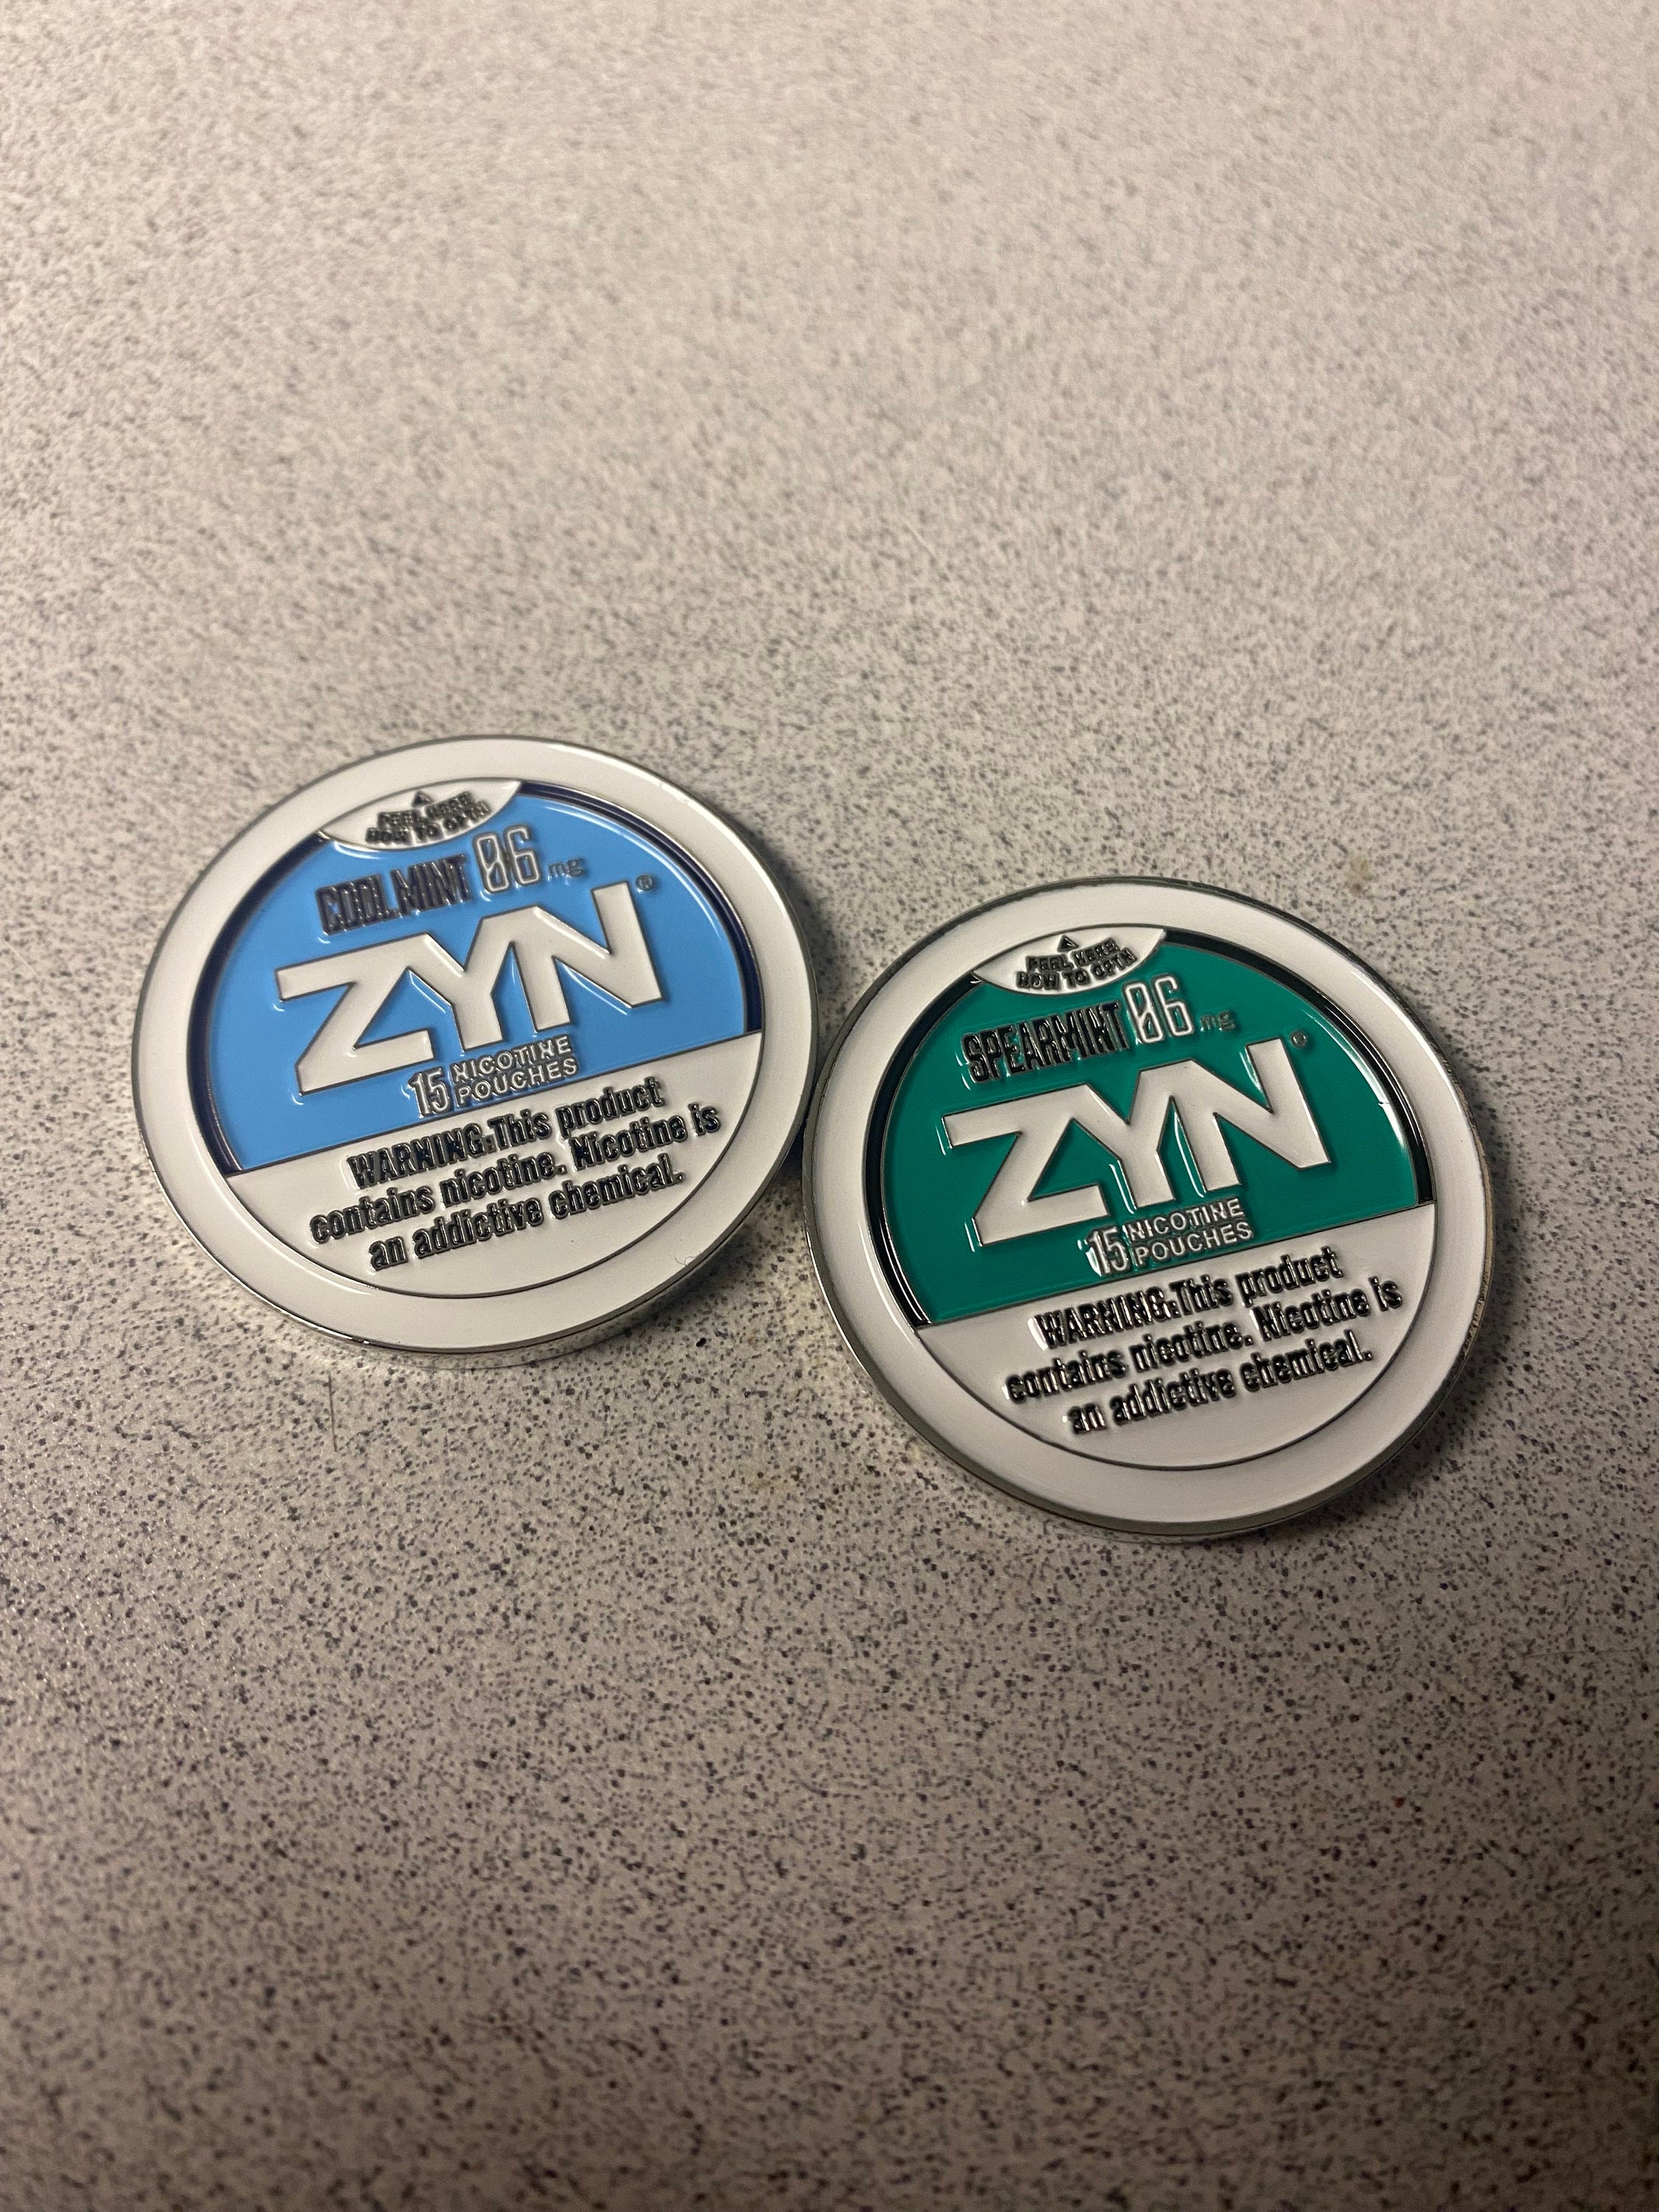 Got the new Zyn Rewards Tin and I'm loving it : r/NicotinePouch